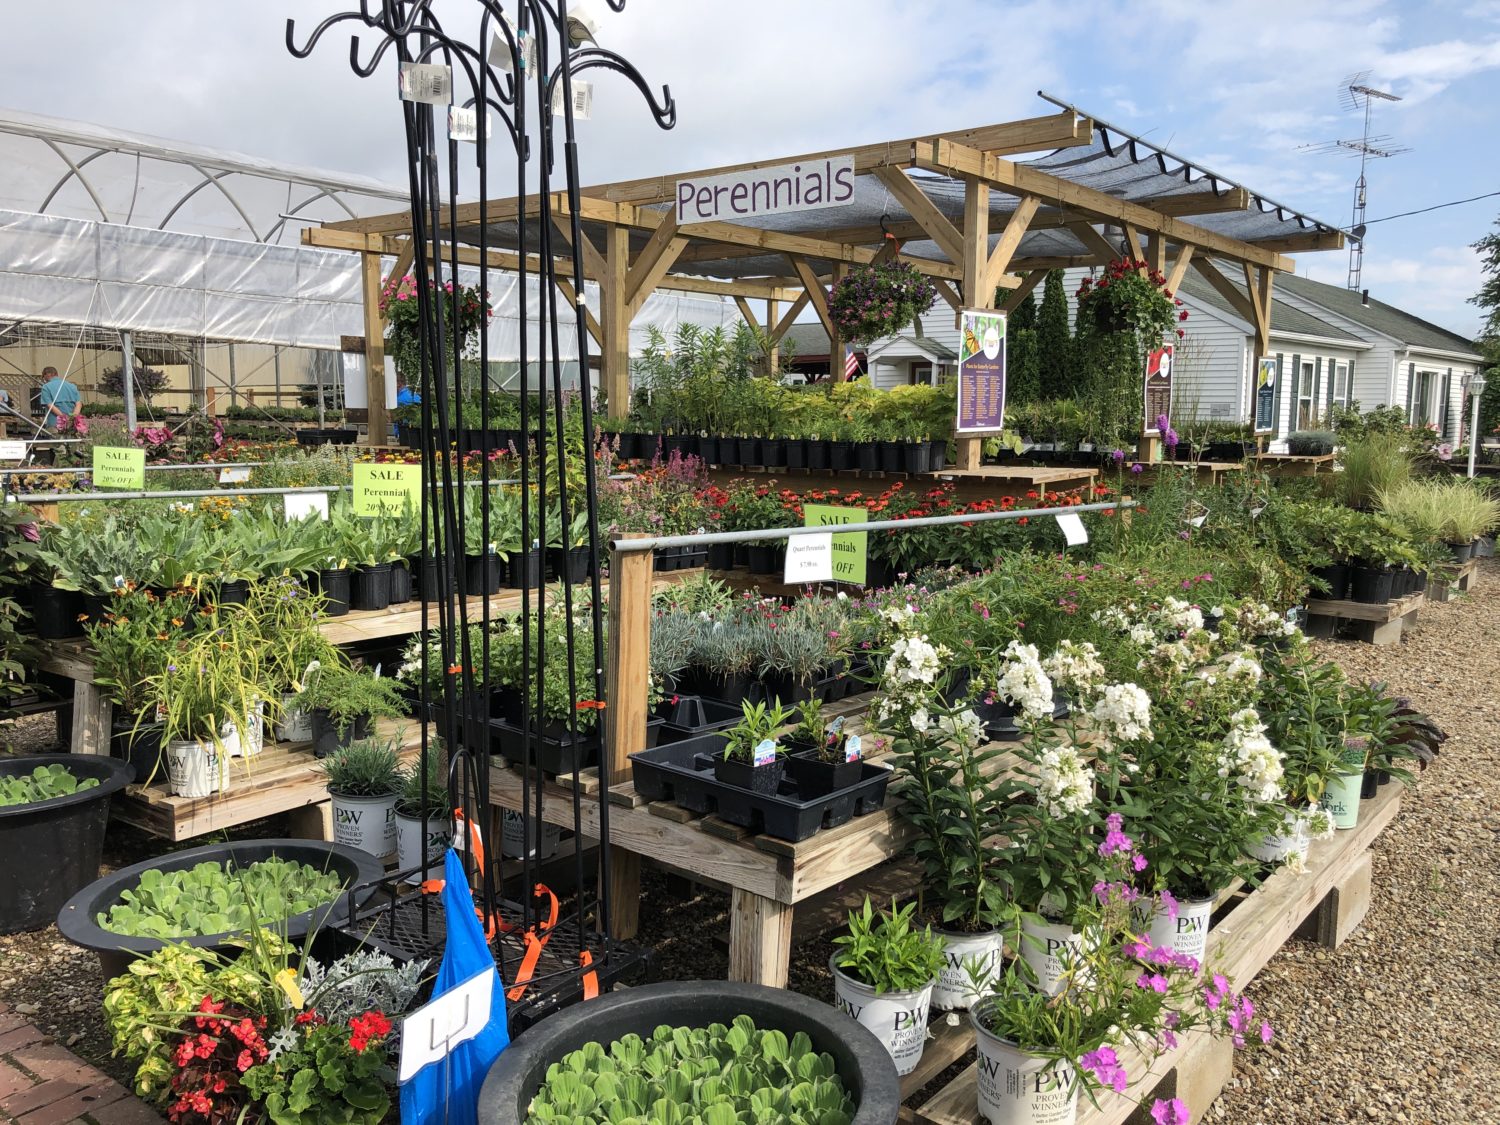 Lush perennials on benches of varying heights with clear signage make it easy for customers to see the selection.